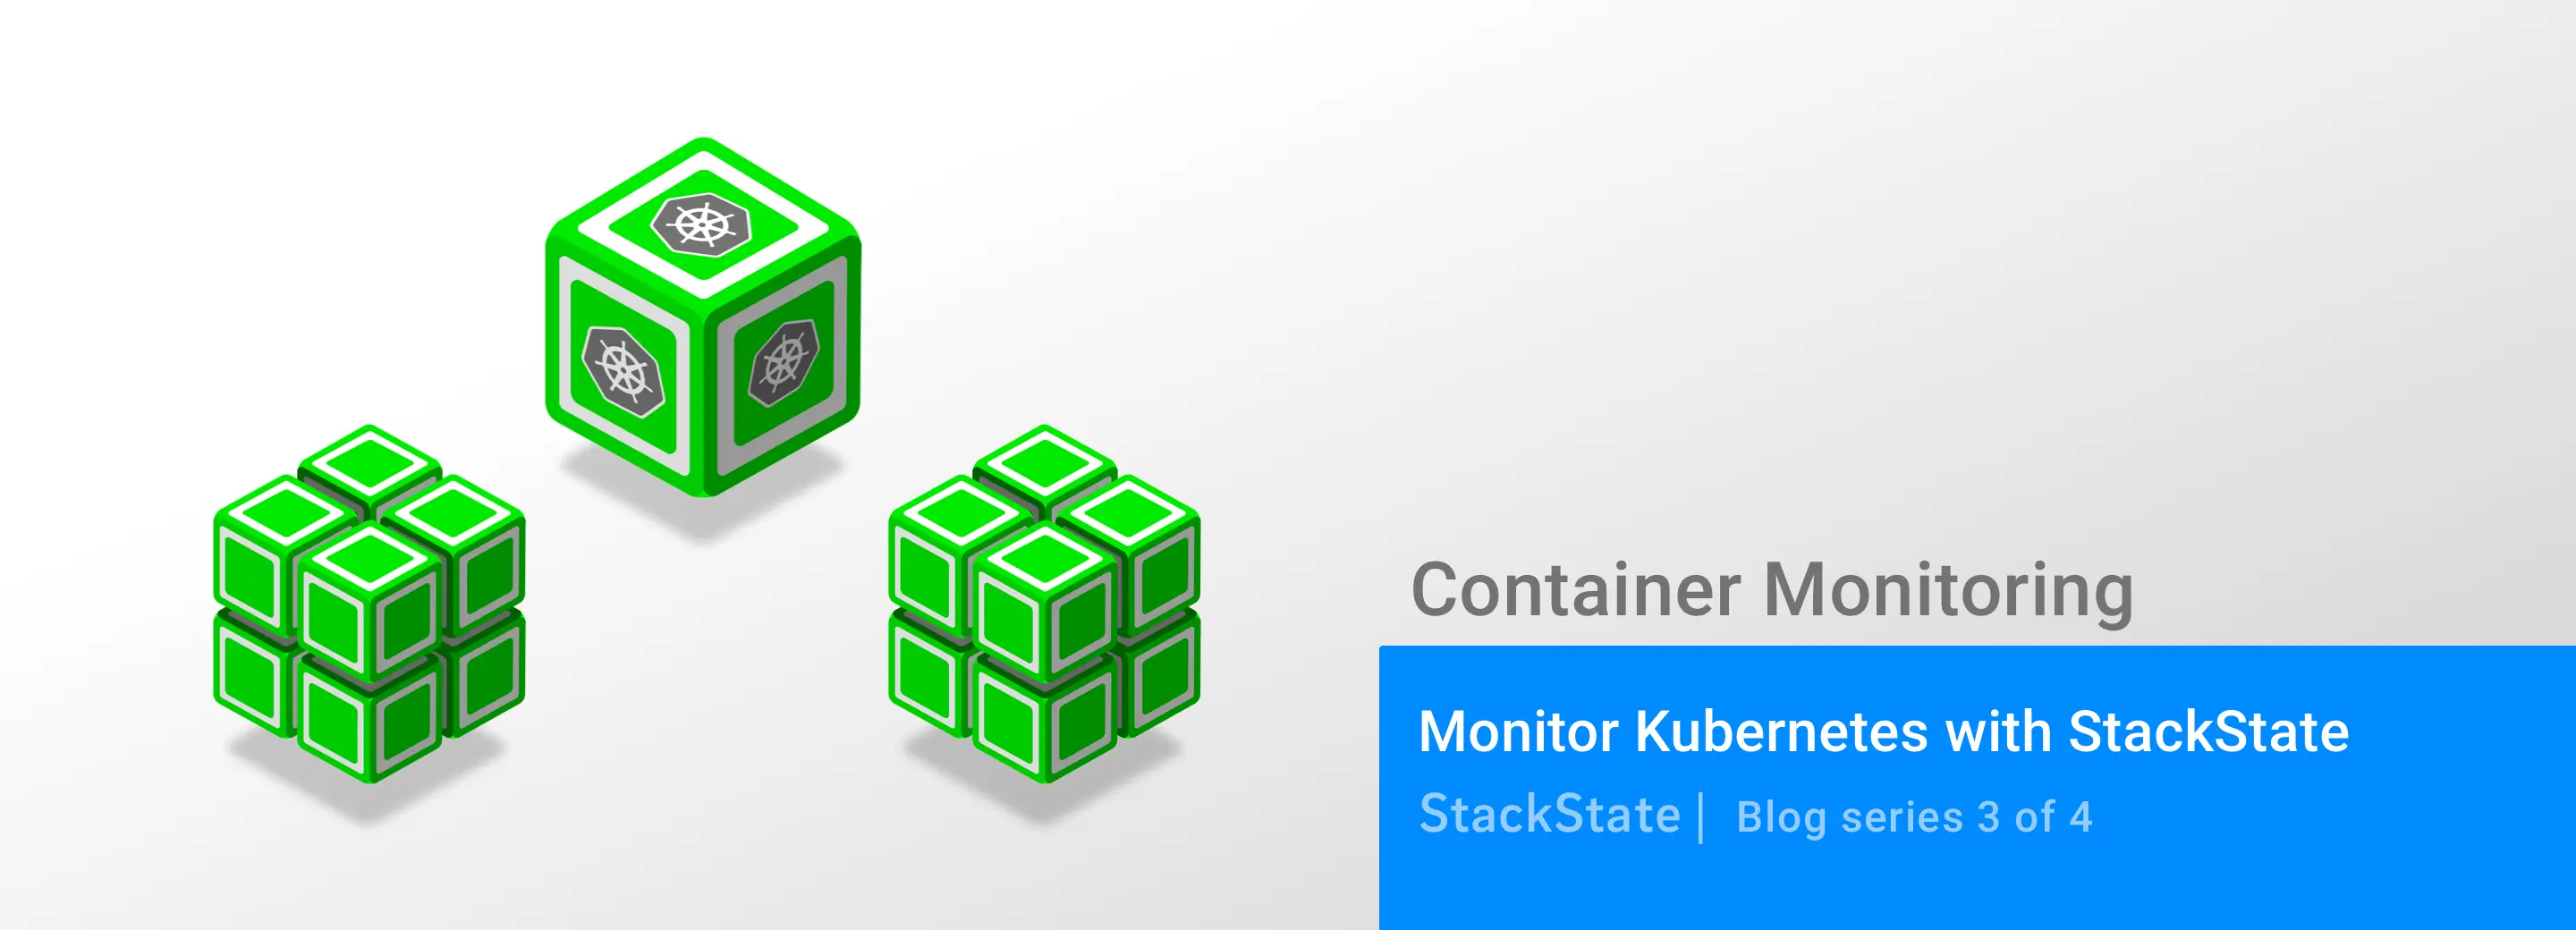 Sts Blog Containers 3 Kubernetes